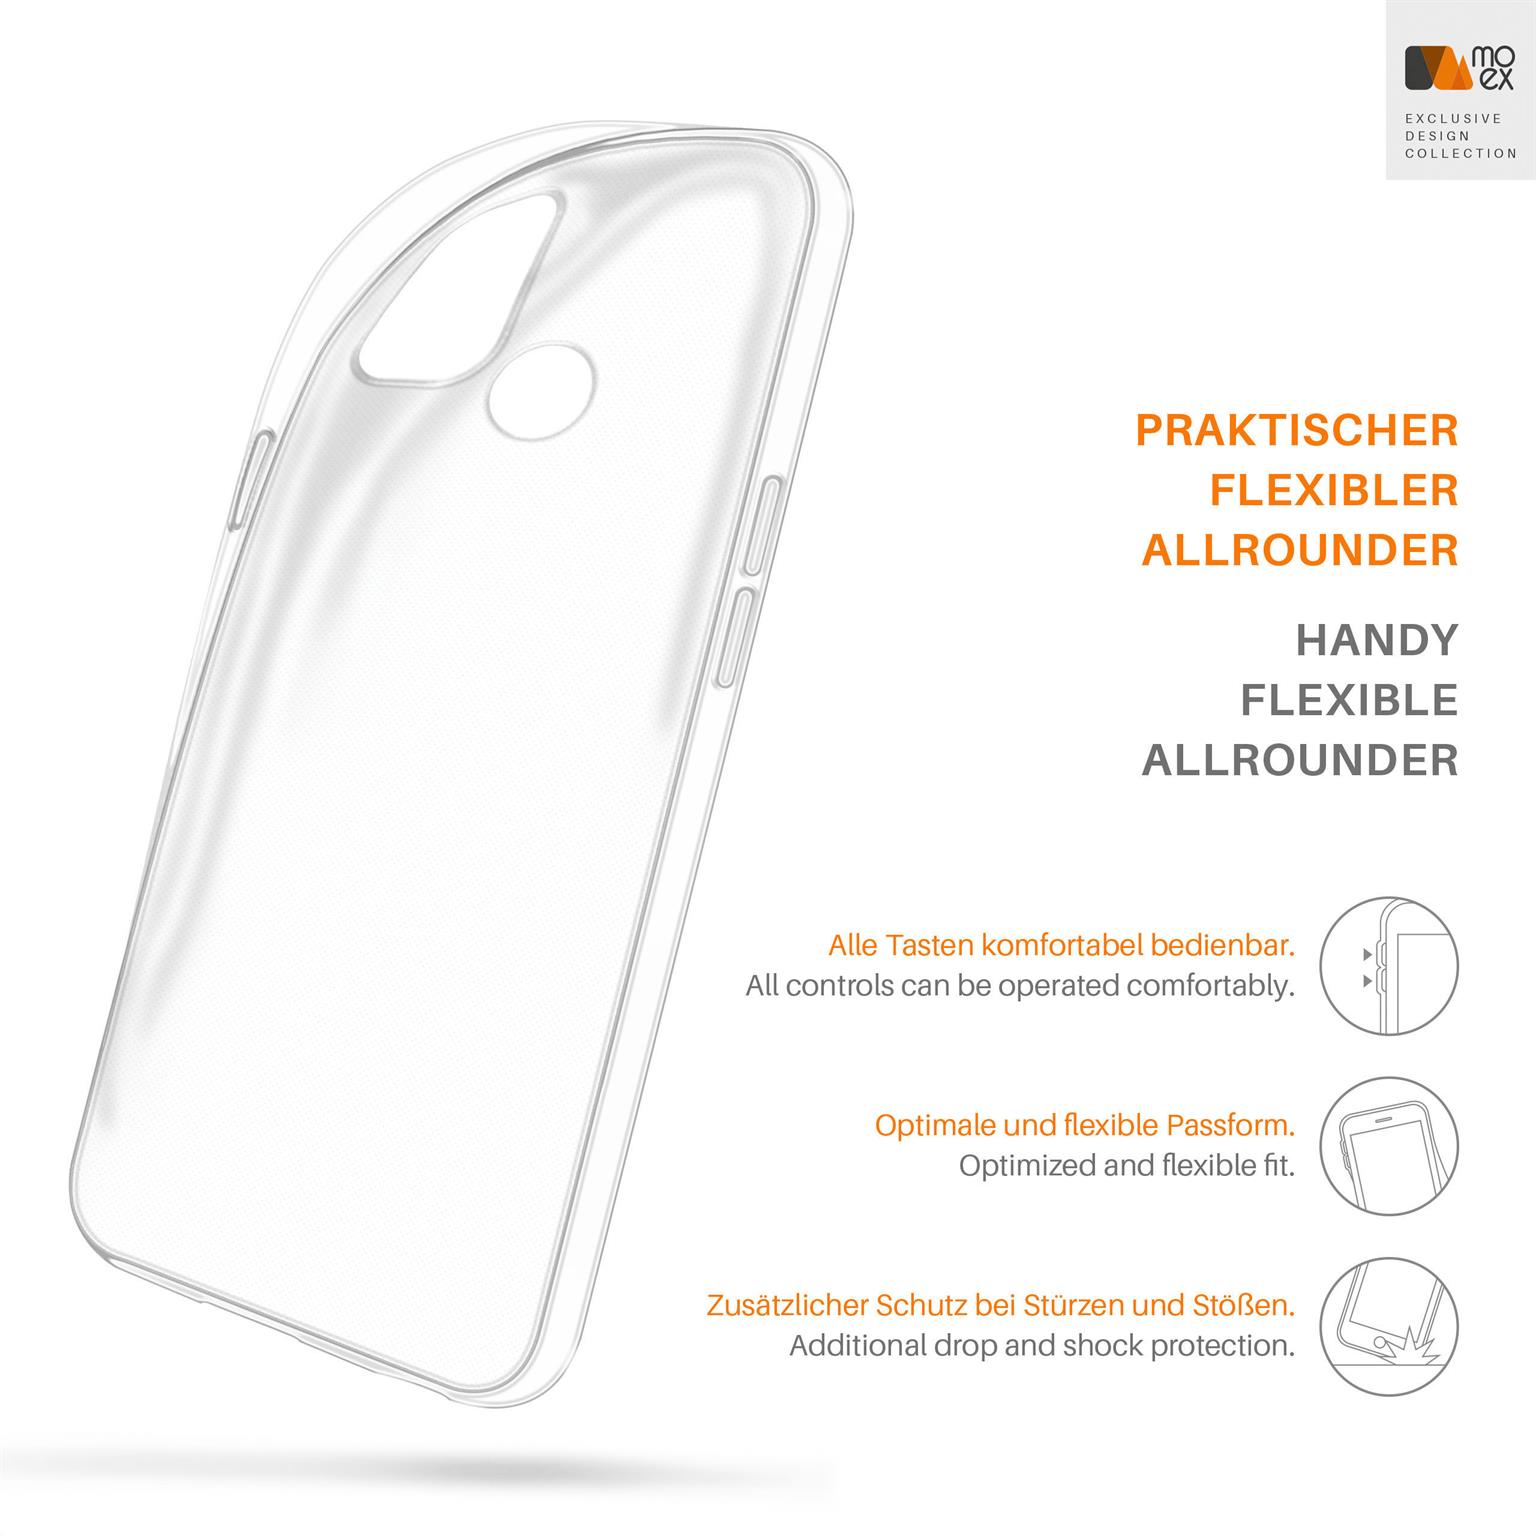 N100, Aero MOEX Crystal-Clear Backcover, Case, OnePlus, Nord